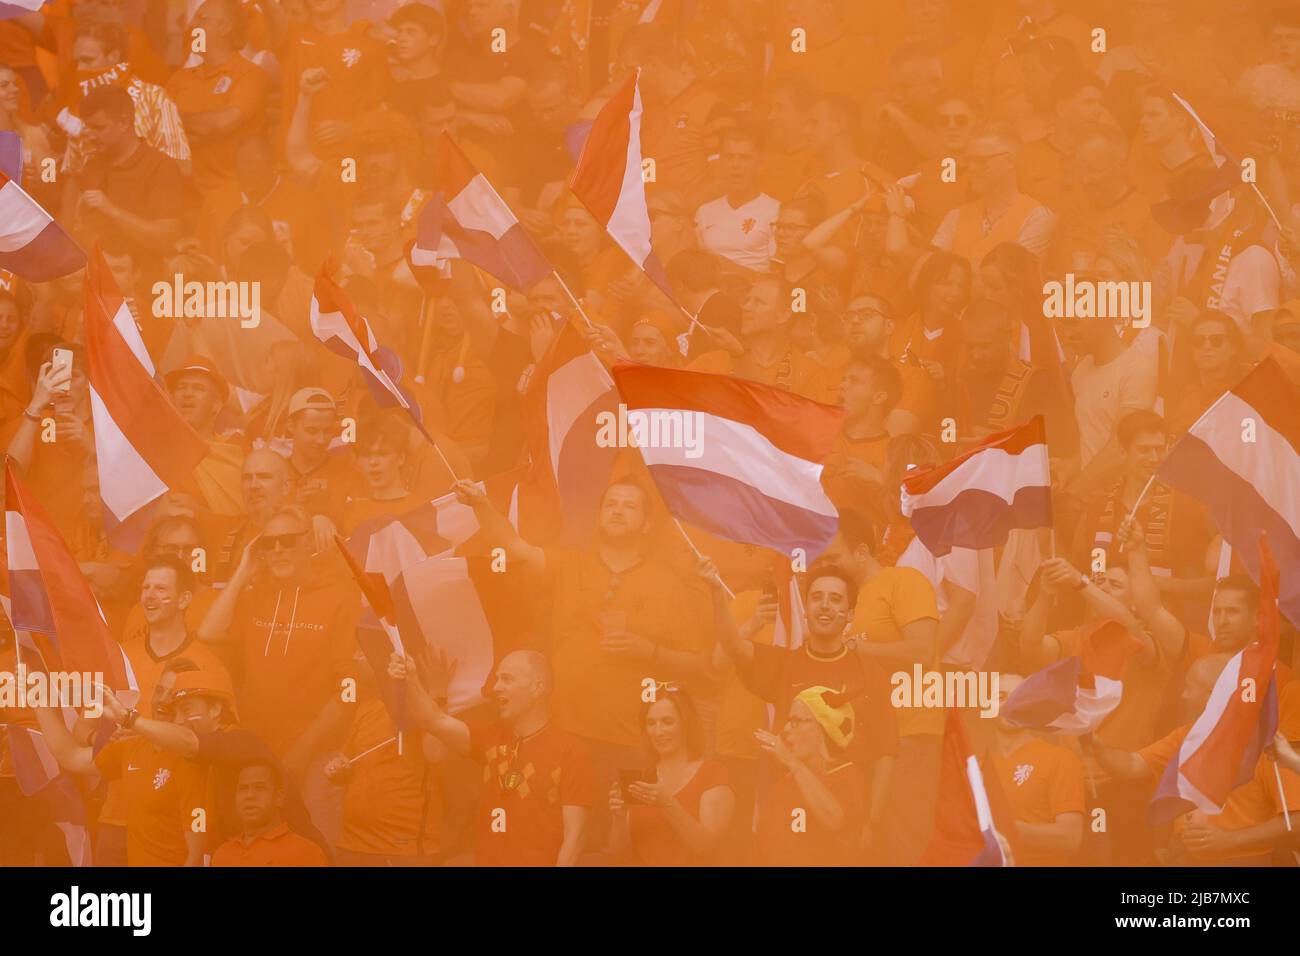 Brussels, Belgium. 03rd June, 2022. 2022-06-03 20:43:25 BRUSSELS - The Orange Legion during the UEFA Nations League match between Belgium and the Netherlands at the King Baudouin Stadium on June 3, 2022 in Brussels, Belgium. ANP KOEN VAN WEEL netherlands out - belgium out Credit: ANP/Alamy Live News Stock Photo